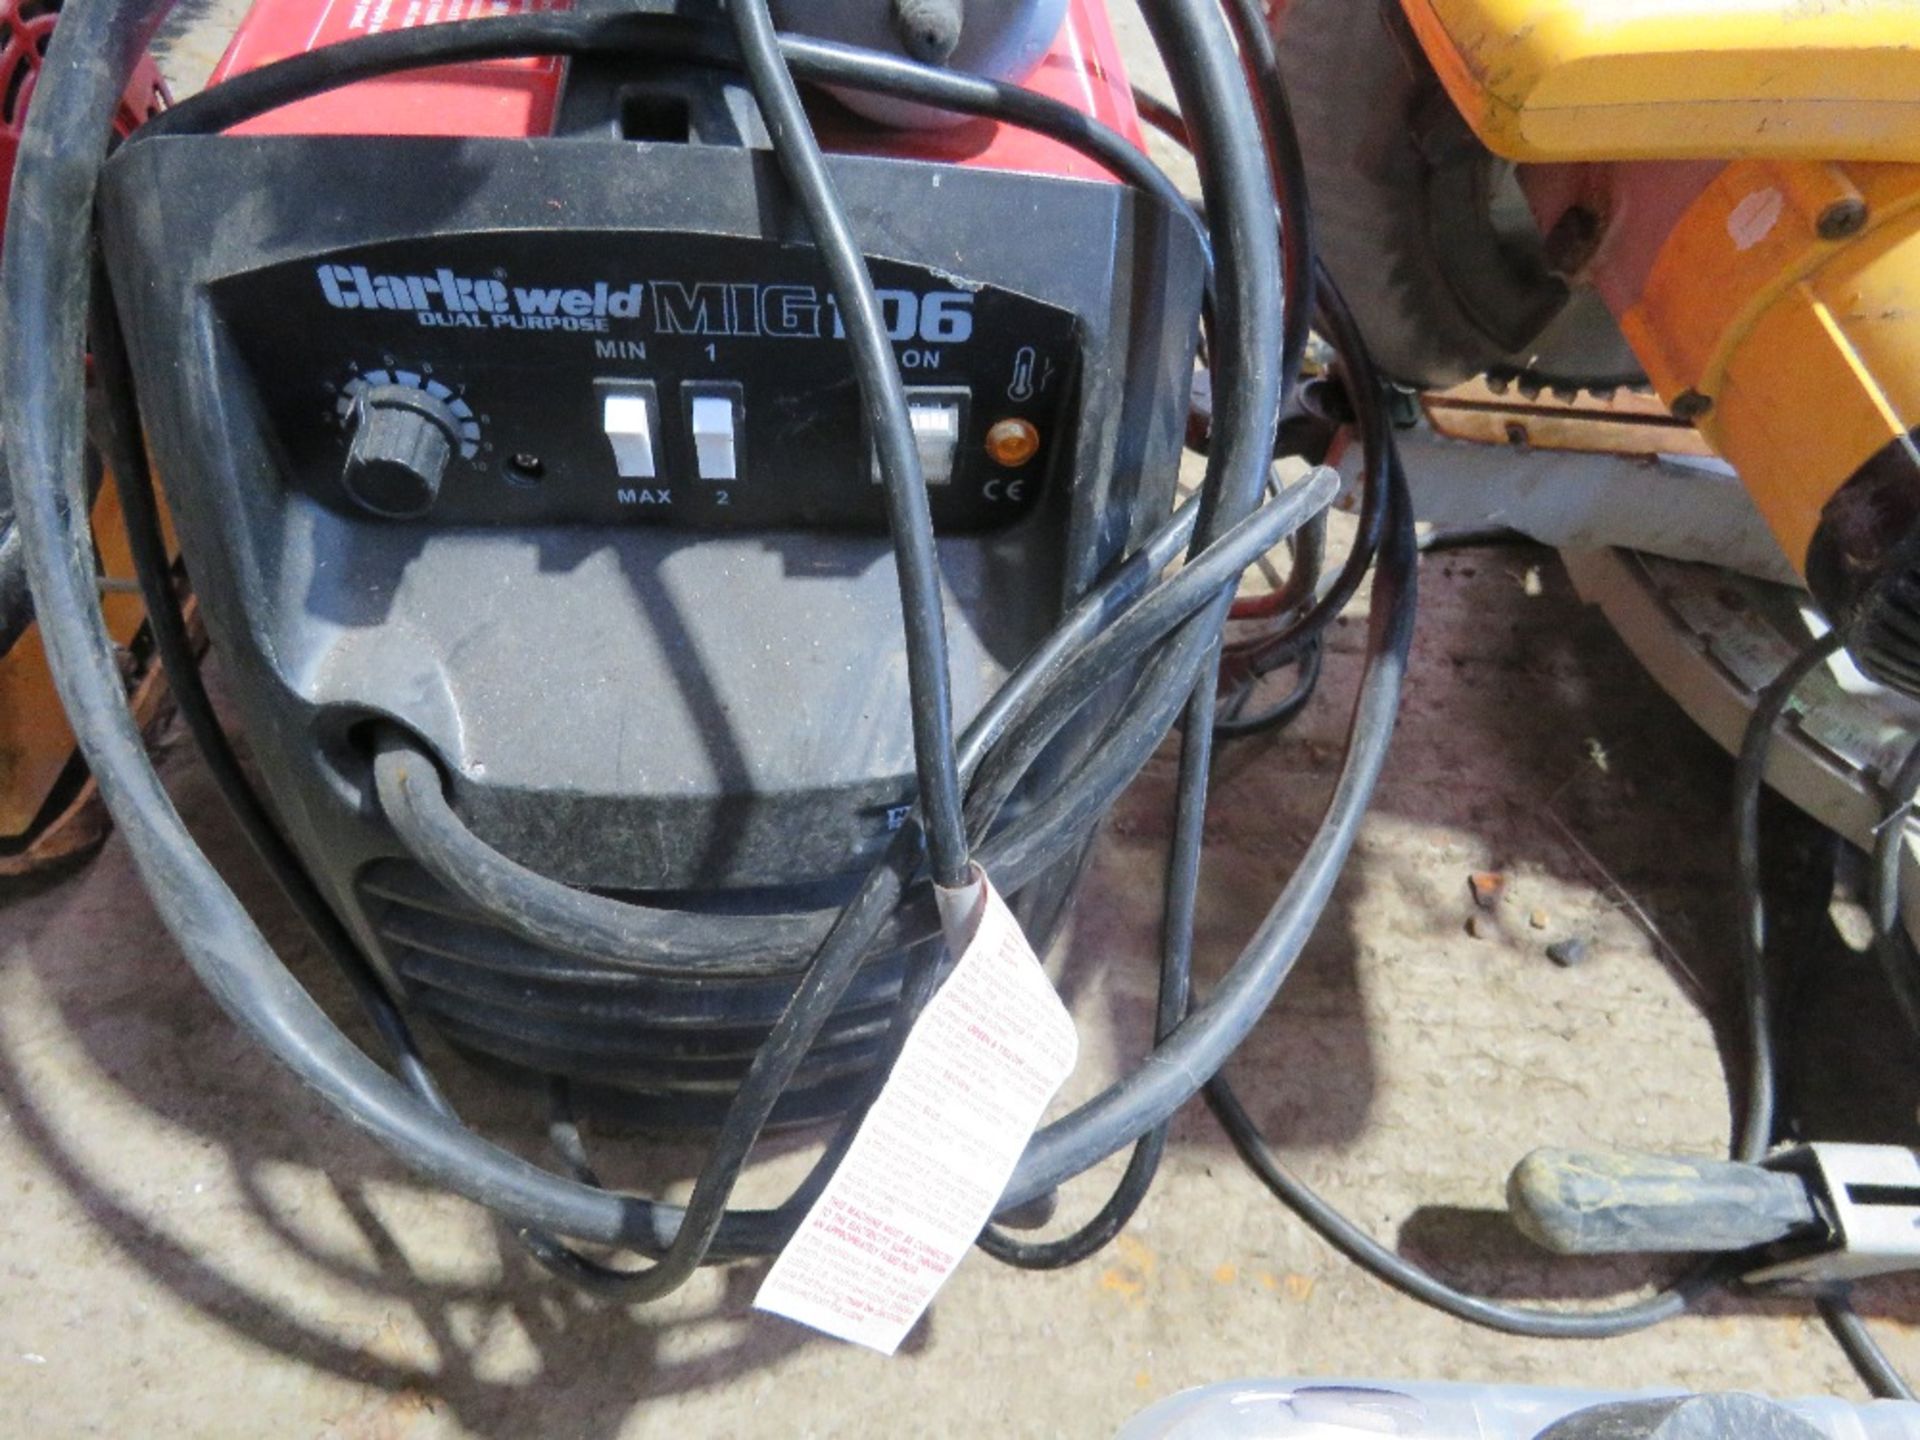 CLARKE 240VOLT MIG 106 WELDER WITH VISOR. DIRECT FROM LOCAL LANDSCAPE COMPANY WHO ARE CLOSING A DEPO - Image 2 of 4